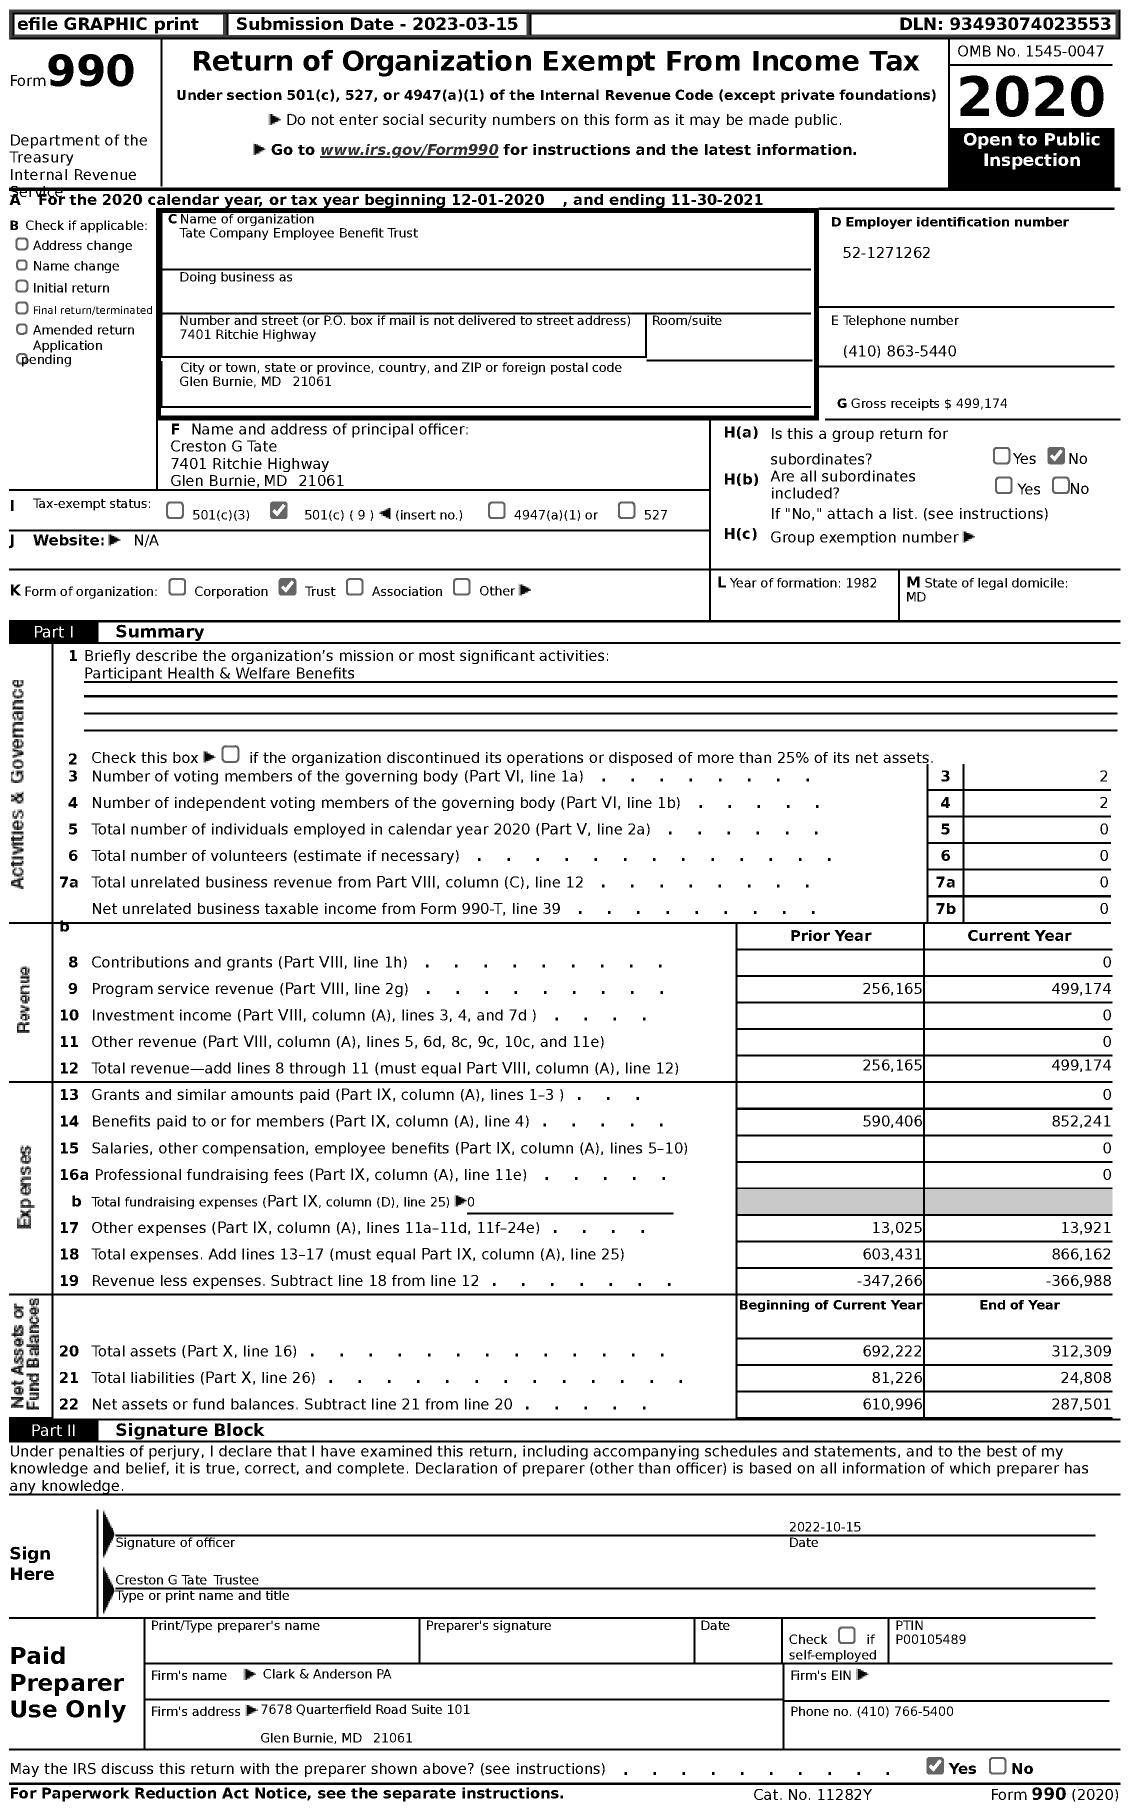 Image of first page of 2020 Form 990 for Tate Company Employee Benefit Trust